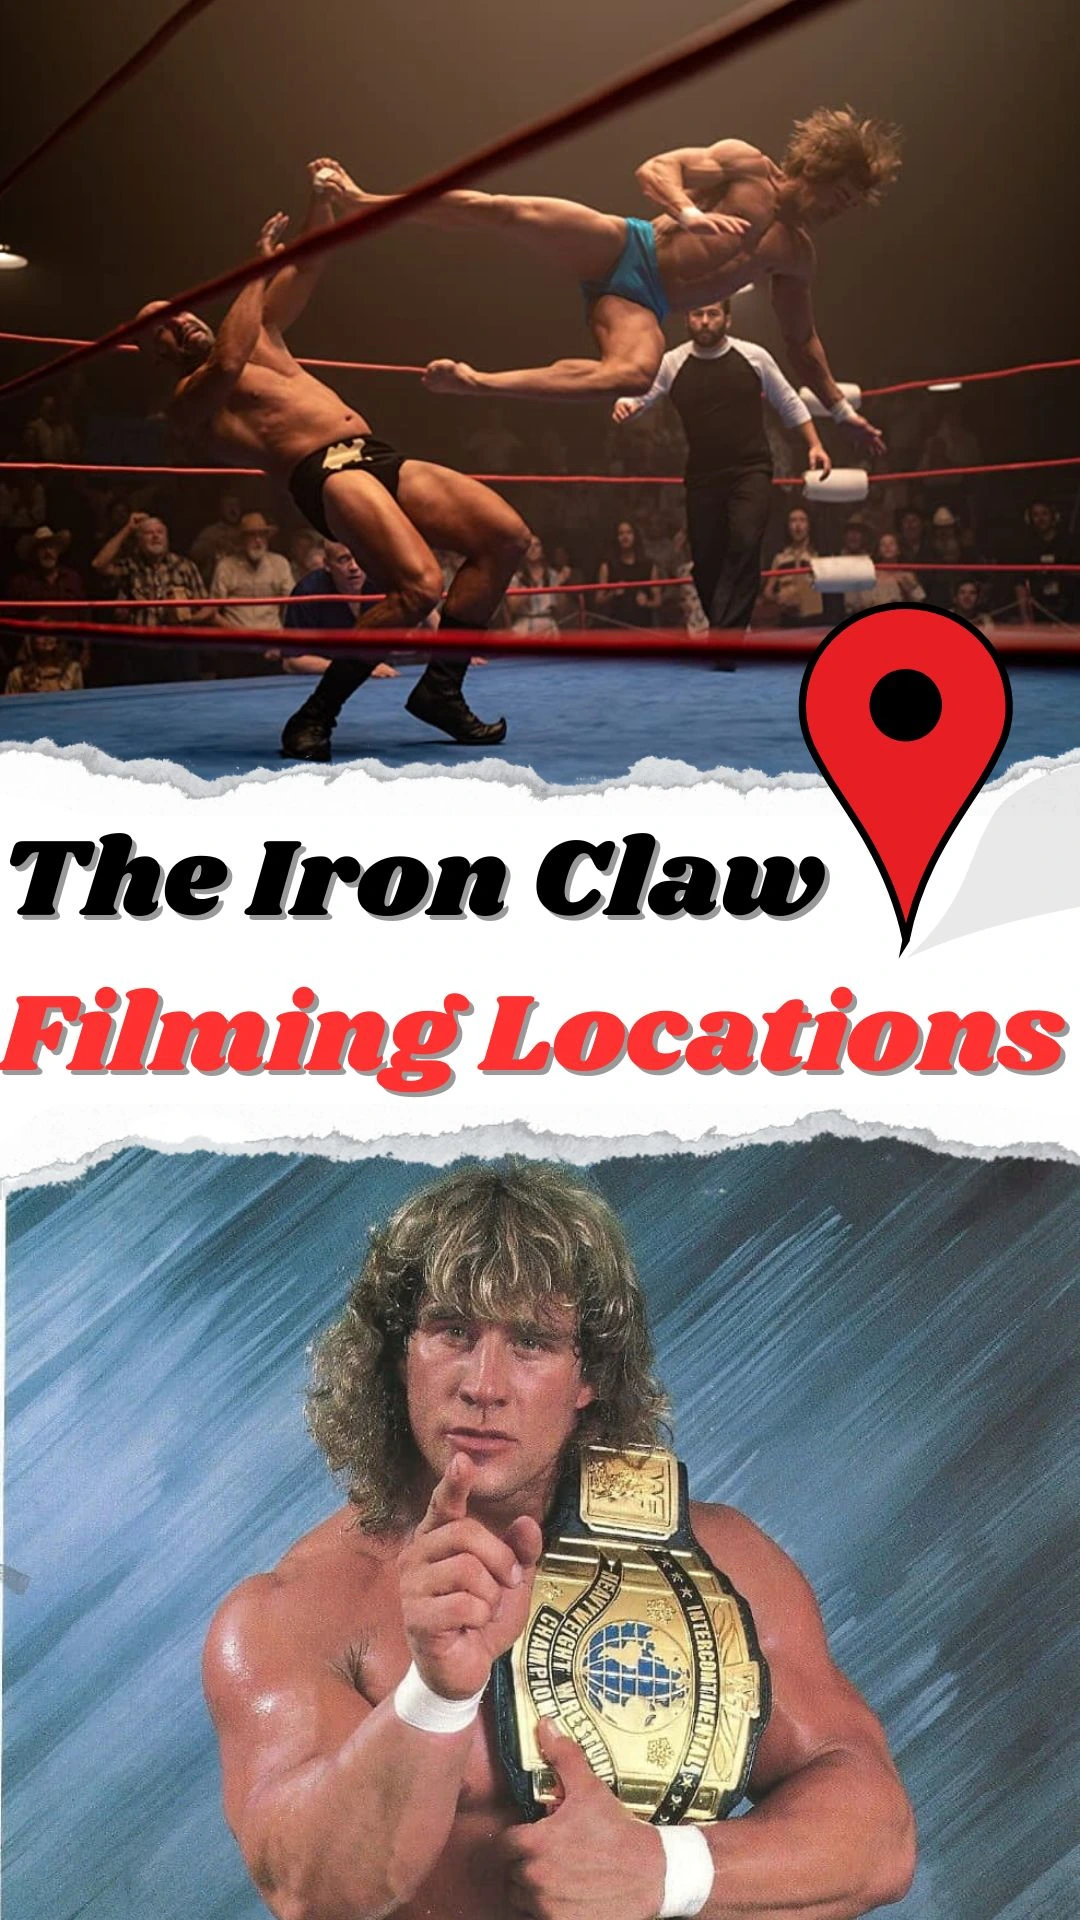 The Iron Claw Filming Locations